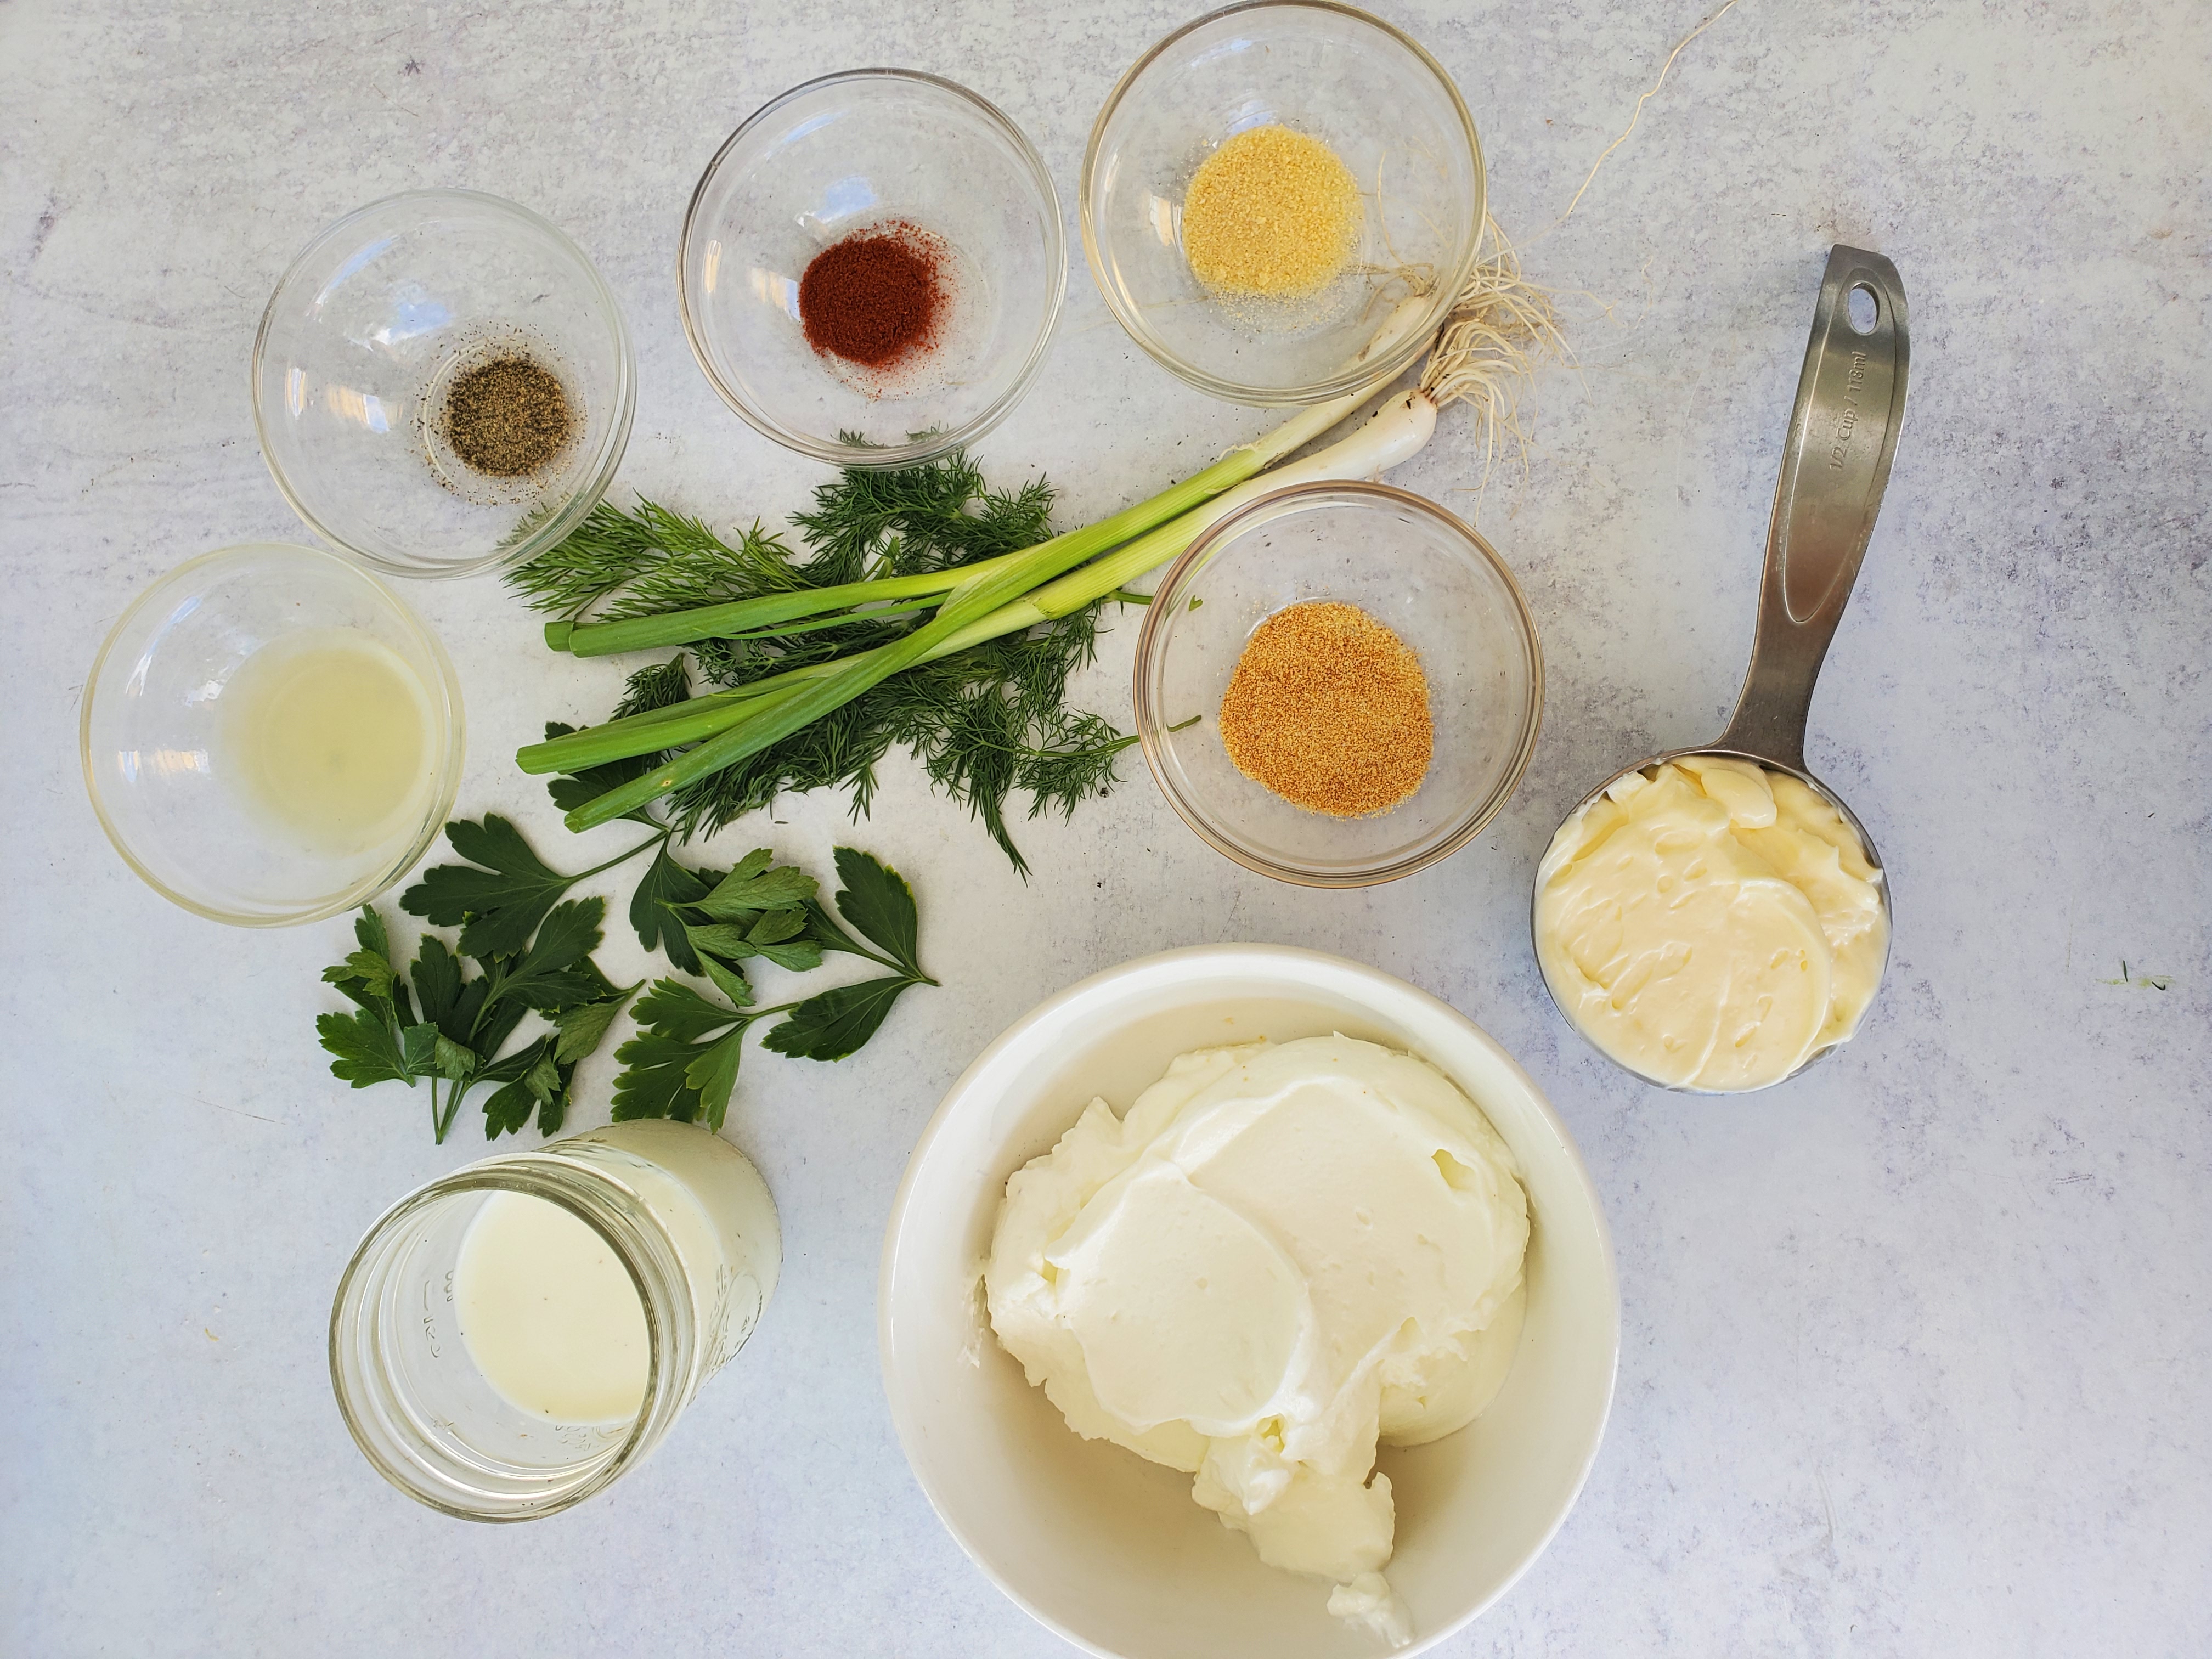 ingredients all laid out for buttermilk ranch dressing